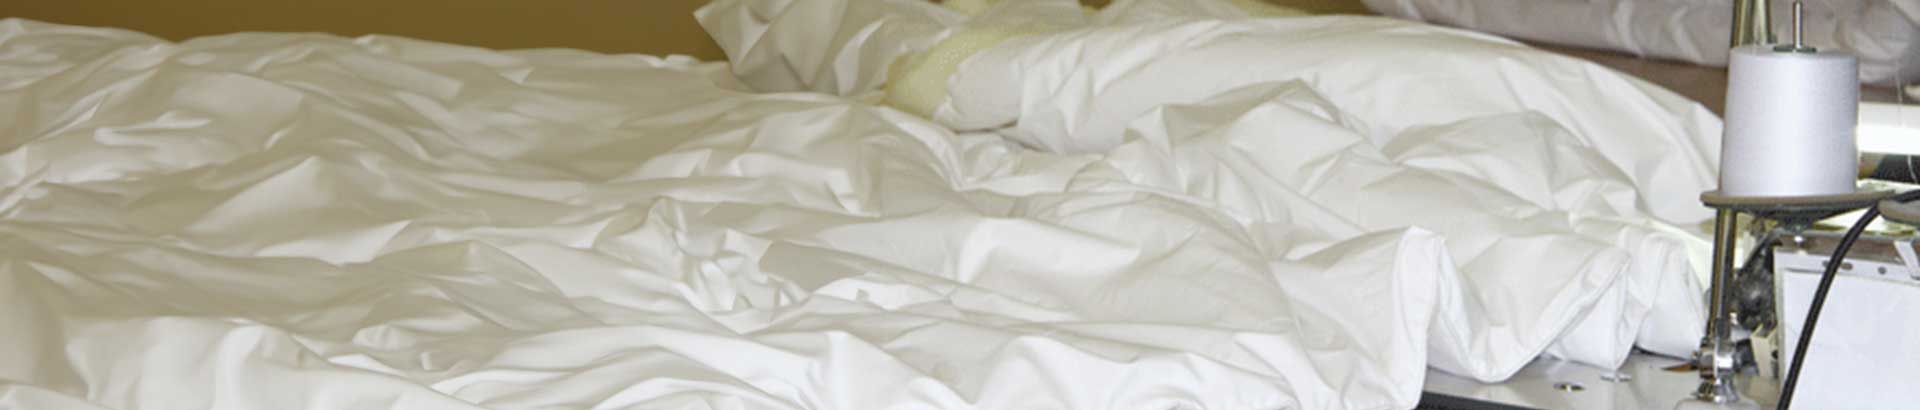 Lightweight 4.5 tog wool duvet coming in single double king super sizes